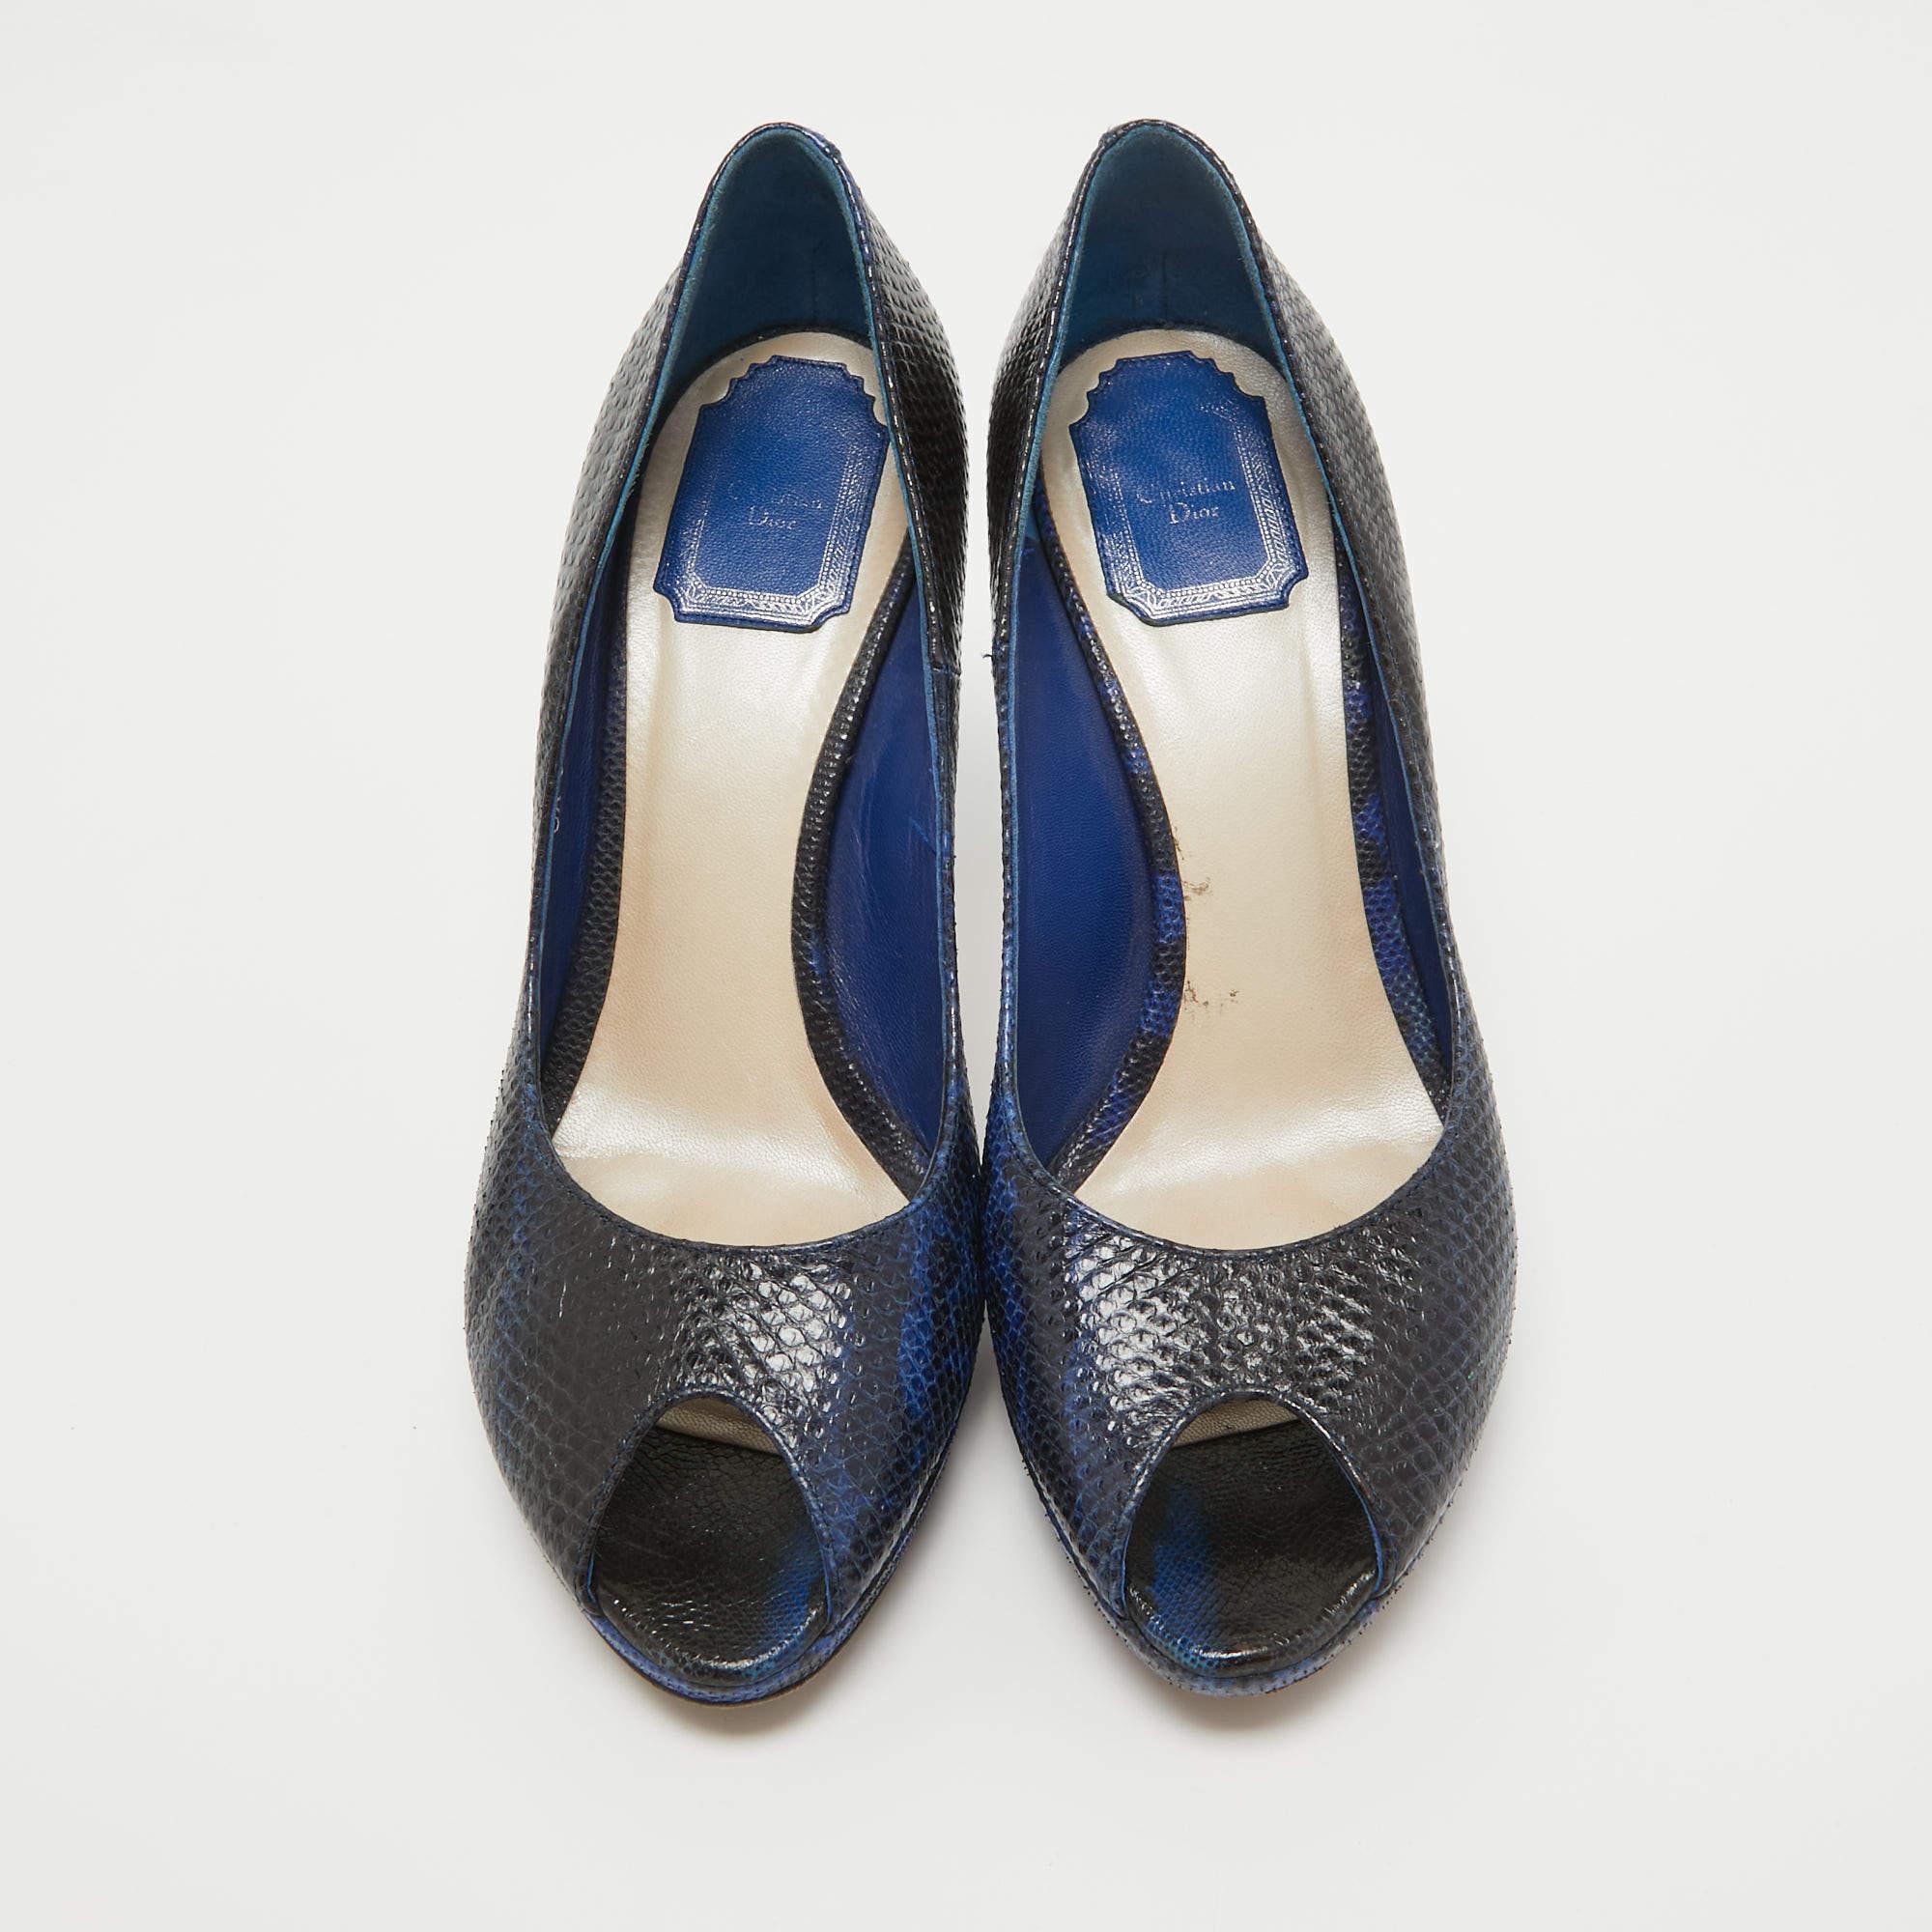 Exhibit an elegant style with this pair of pumps. These Dior shoes for women are crafted from quality materials. They are set on durable soles and sleek heels.

Includes: Original Dustbag

